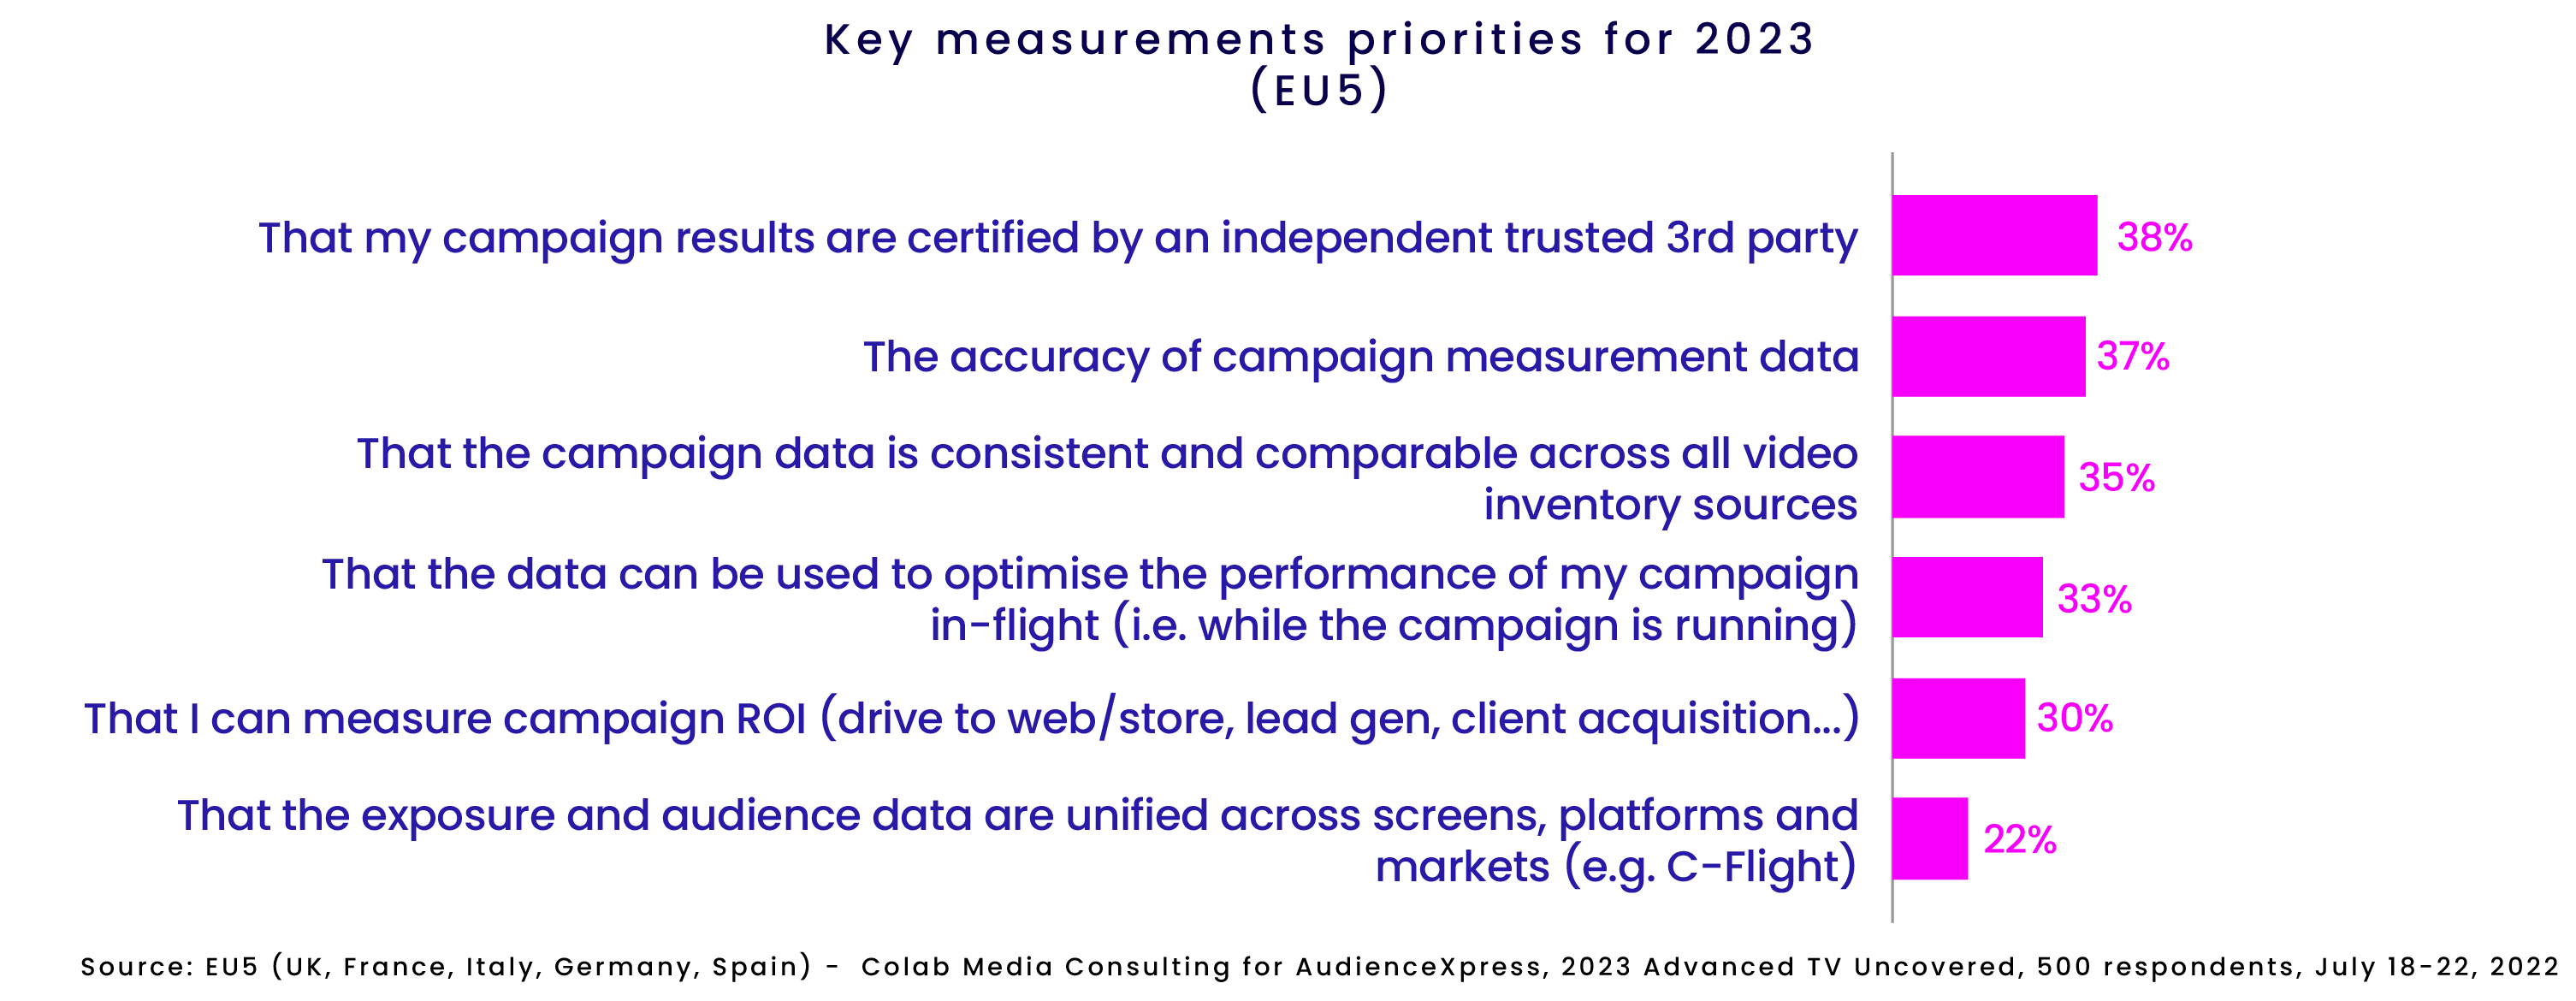 Chart displaying the percent of respondents that agree with key measurements priorities. 25% of respondents agree that my campaign results are certified by an independent trusted 3rd party.